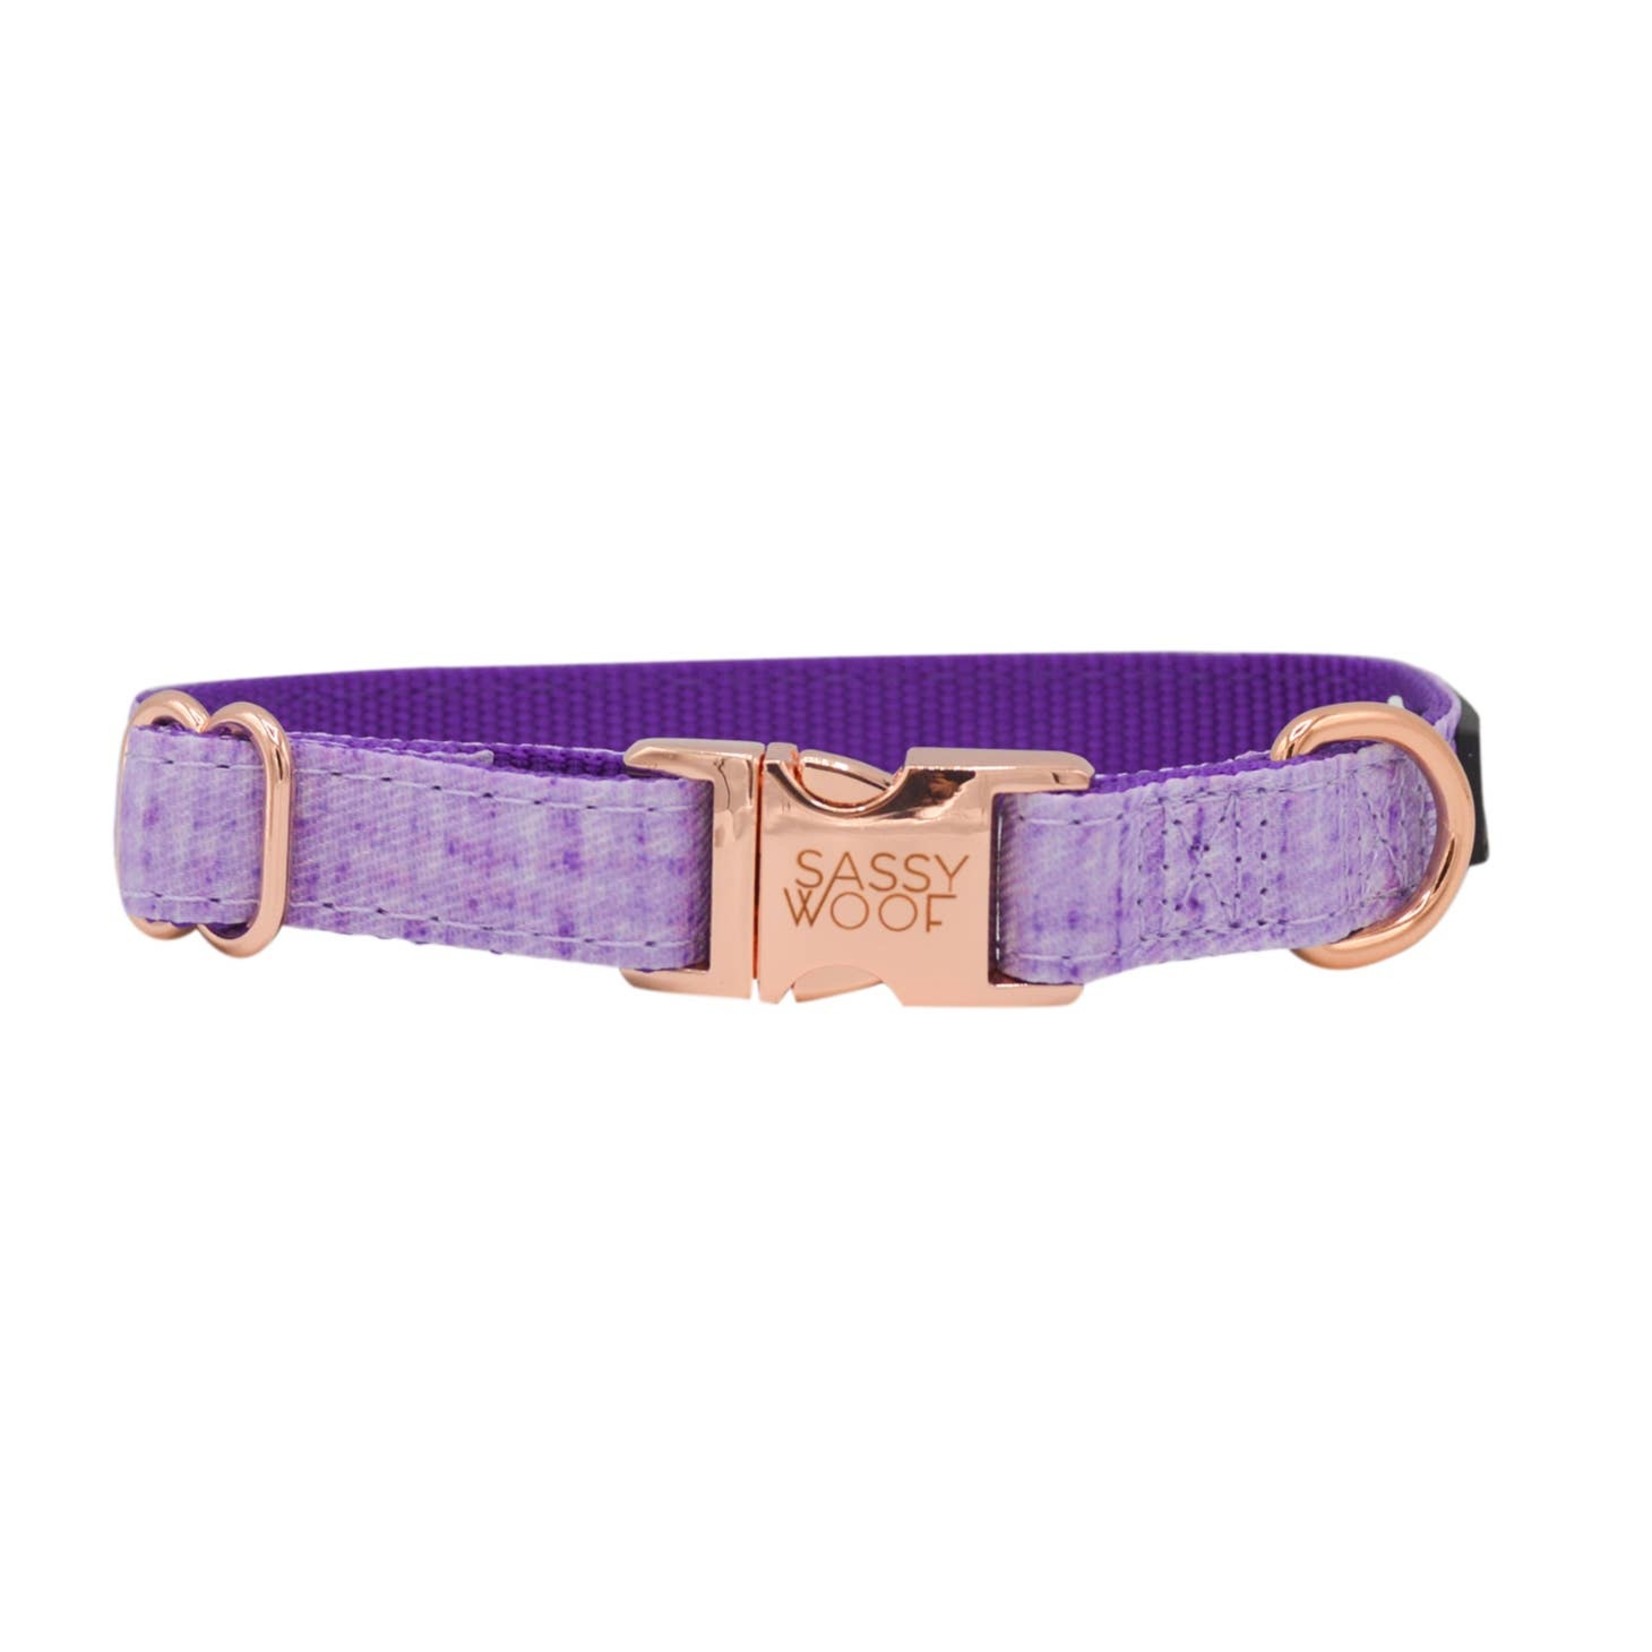 Sassy Woof Dog Collars in Strie